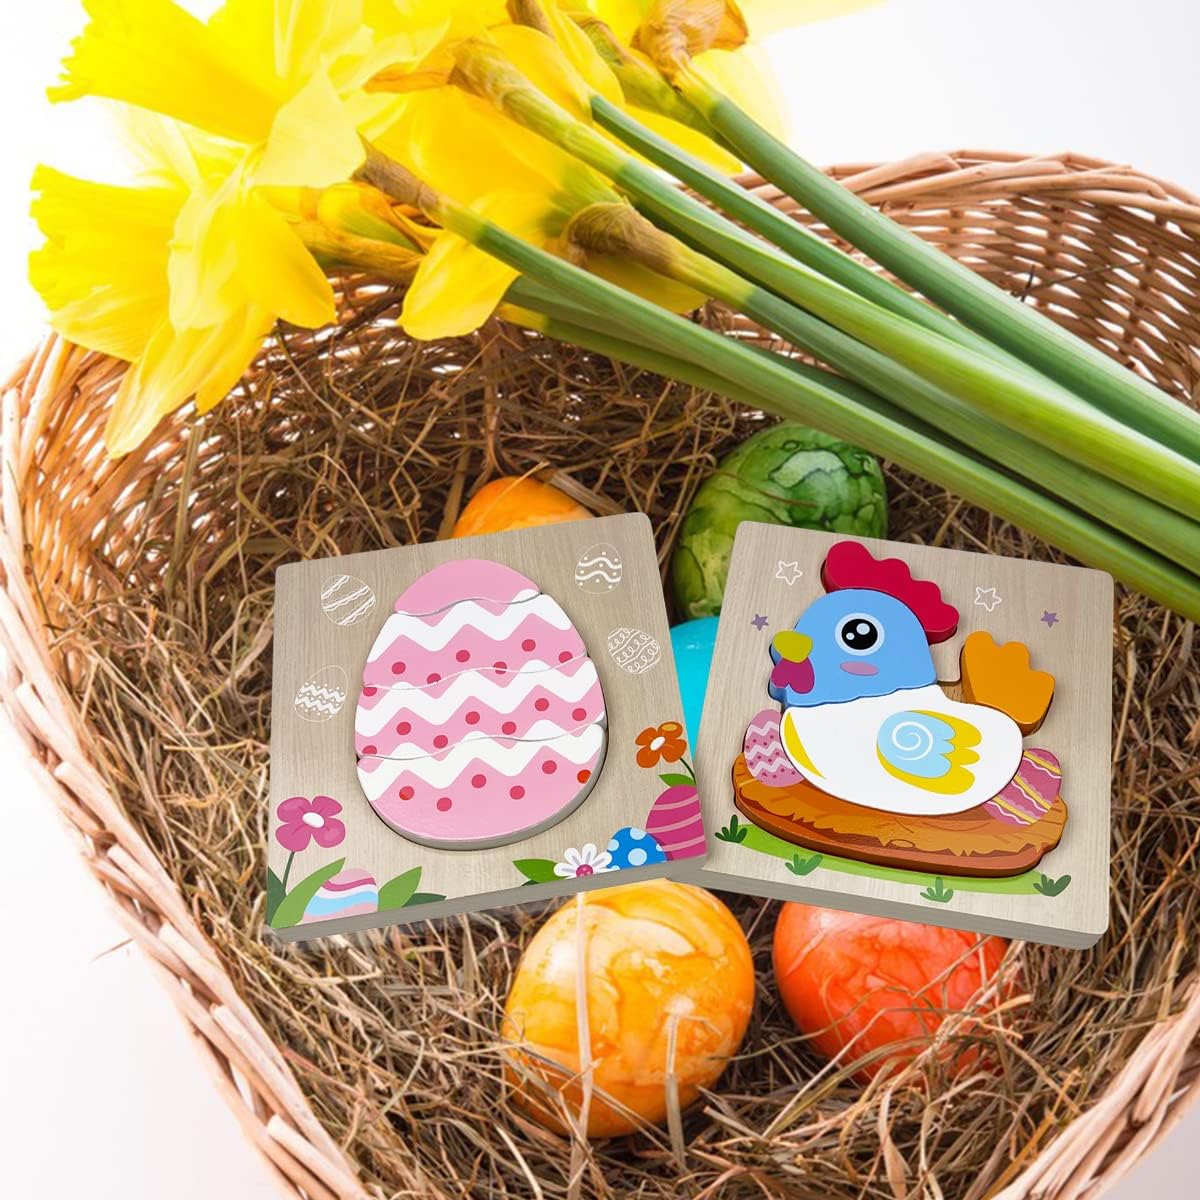 A festive Easter arrangement featuring a wicker basket with painted eggs, colorful InvenToy Montessori Easter Wooden Puzzles (4 Pack) with an egg and a duck design, and a bouquet of yellow daffodils on a white background.